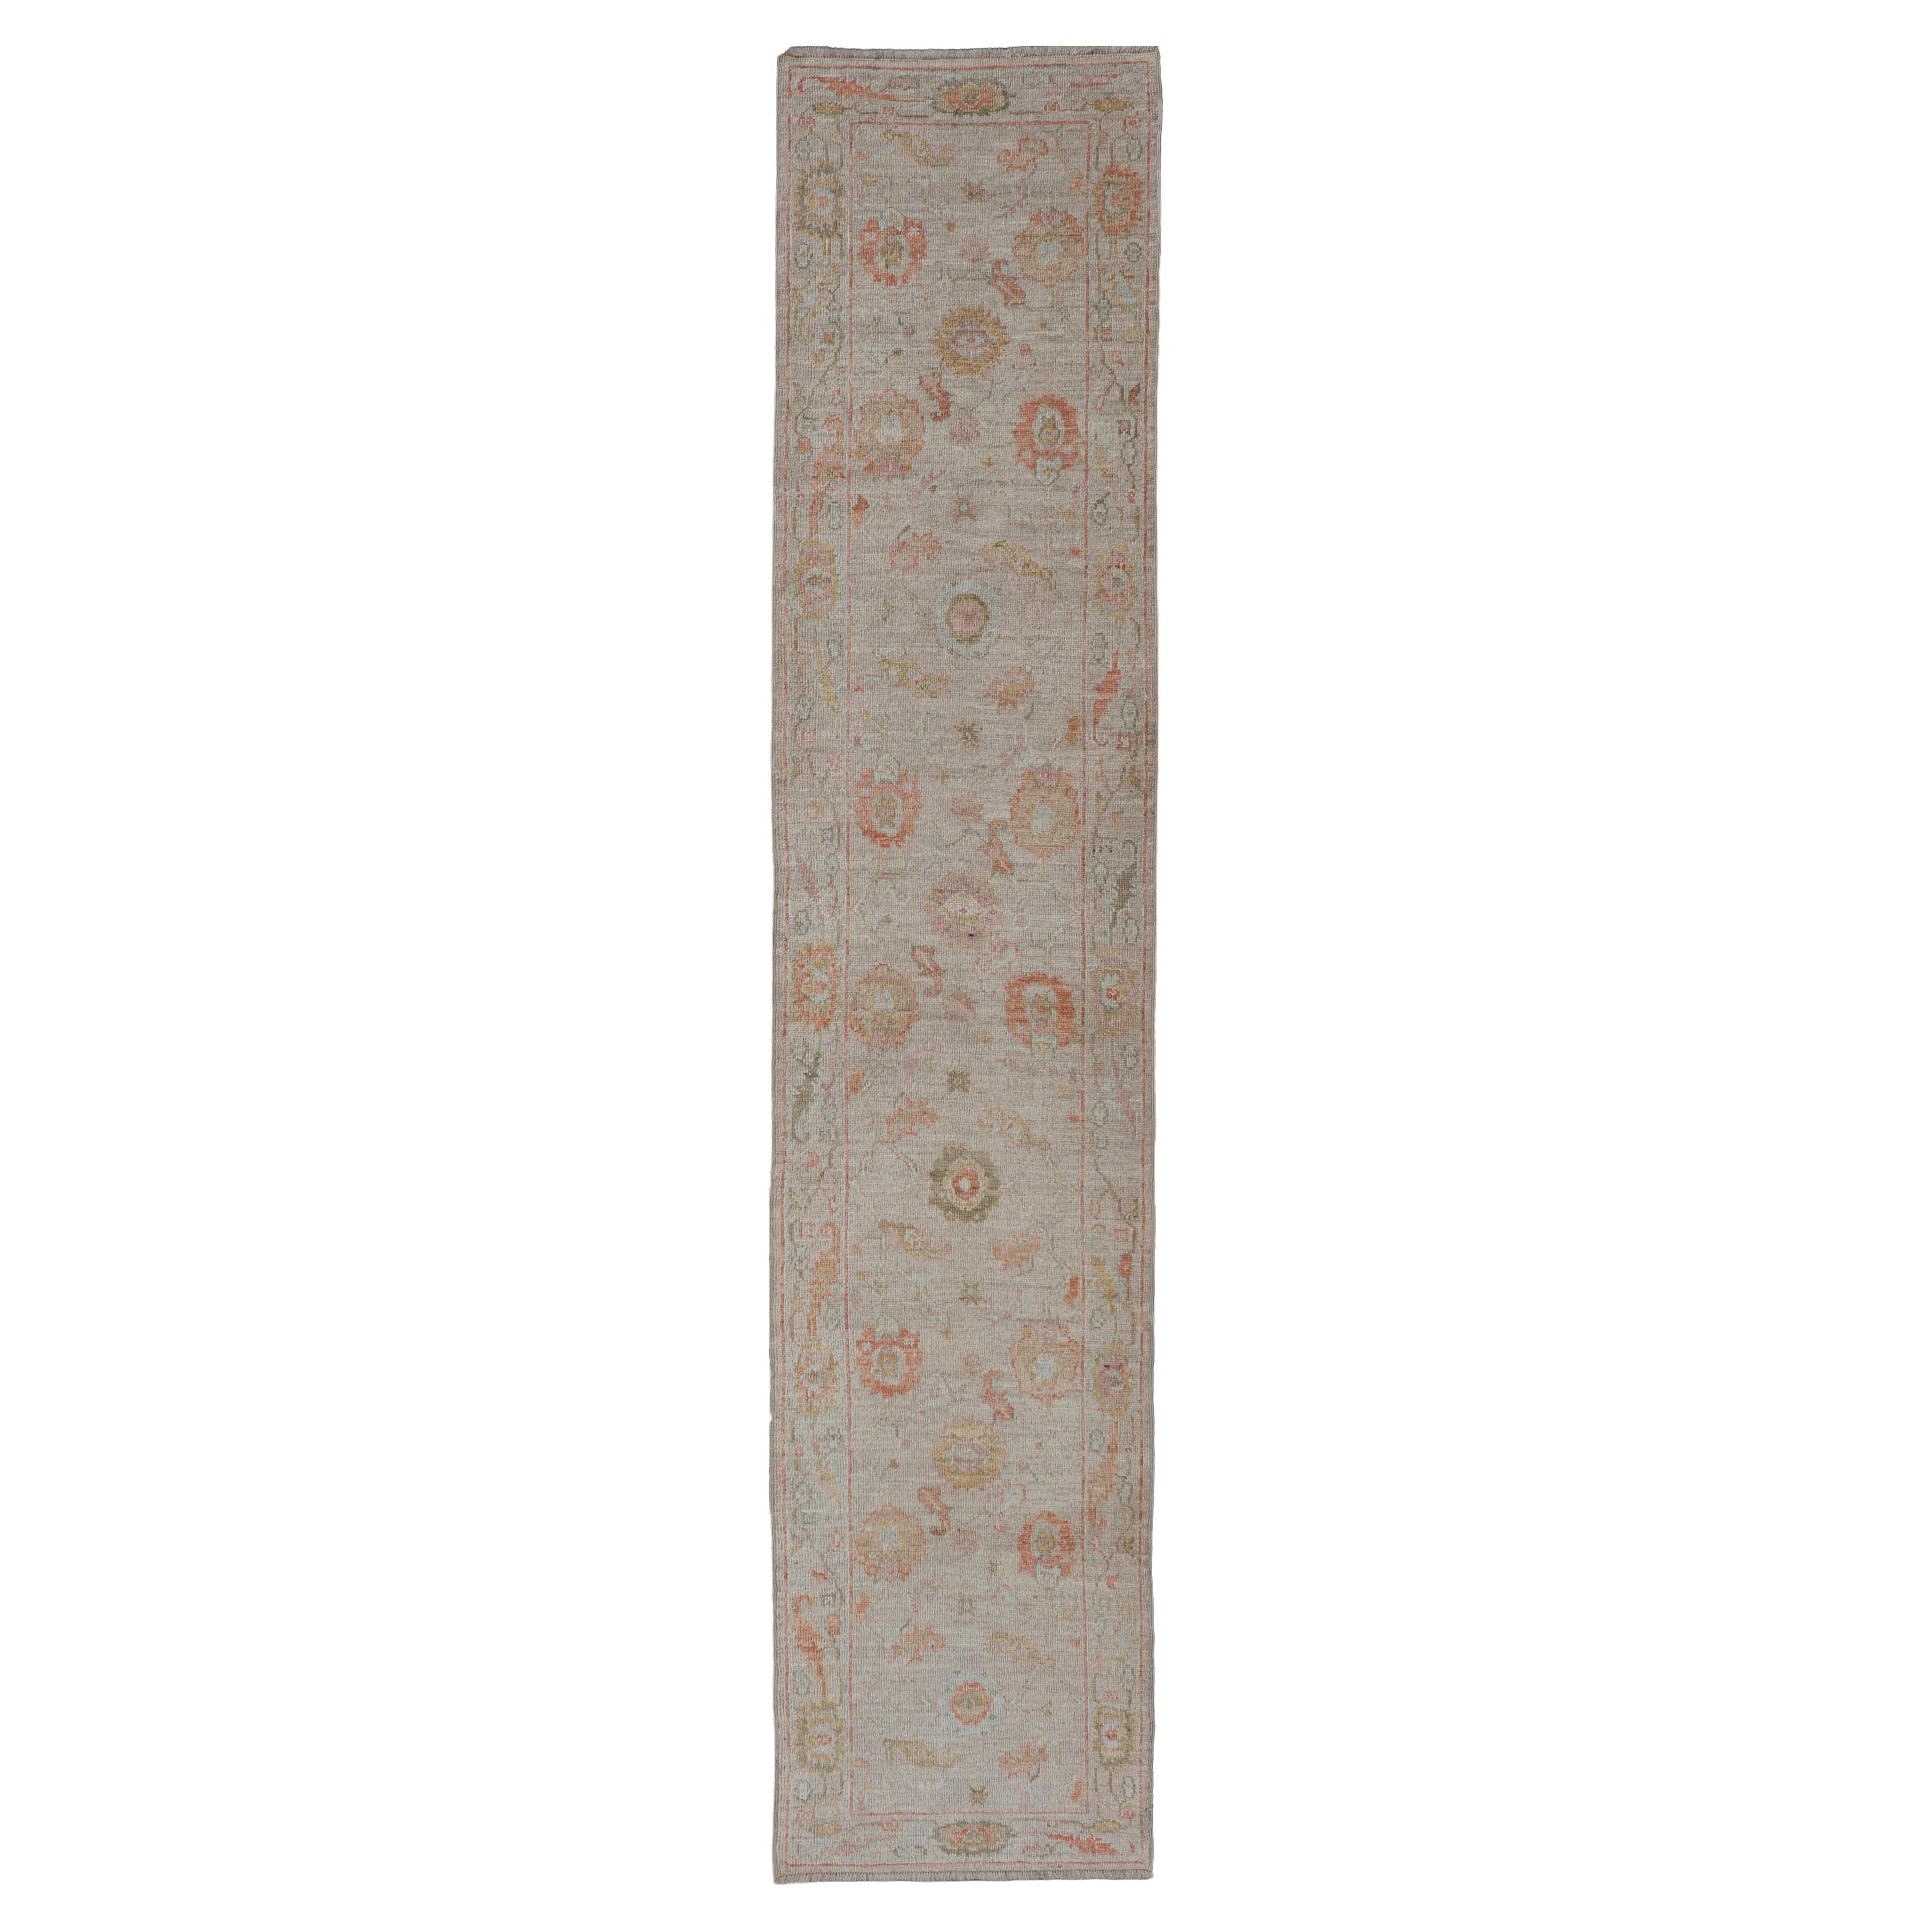 Angora Turkish Oushak Floral Runner in Cream with Pops of Orange, Green and Blue